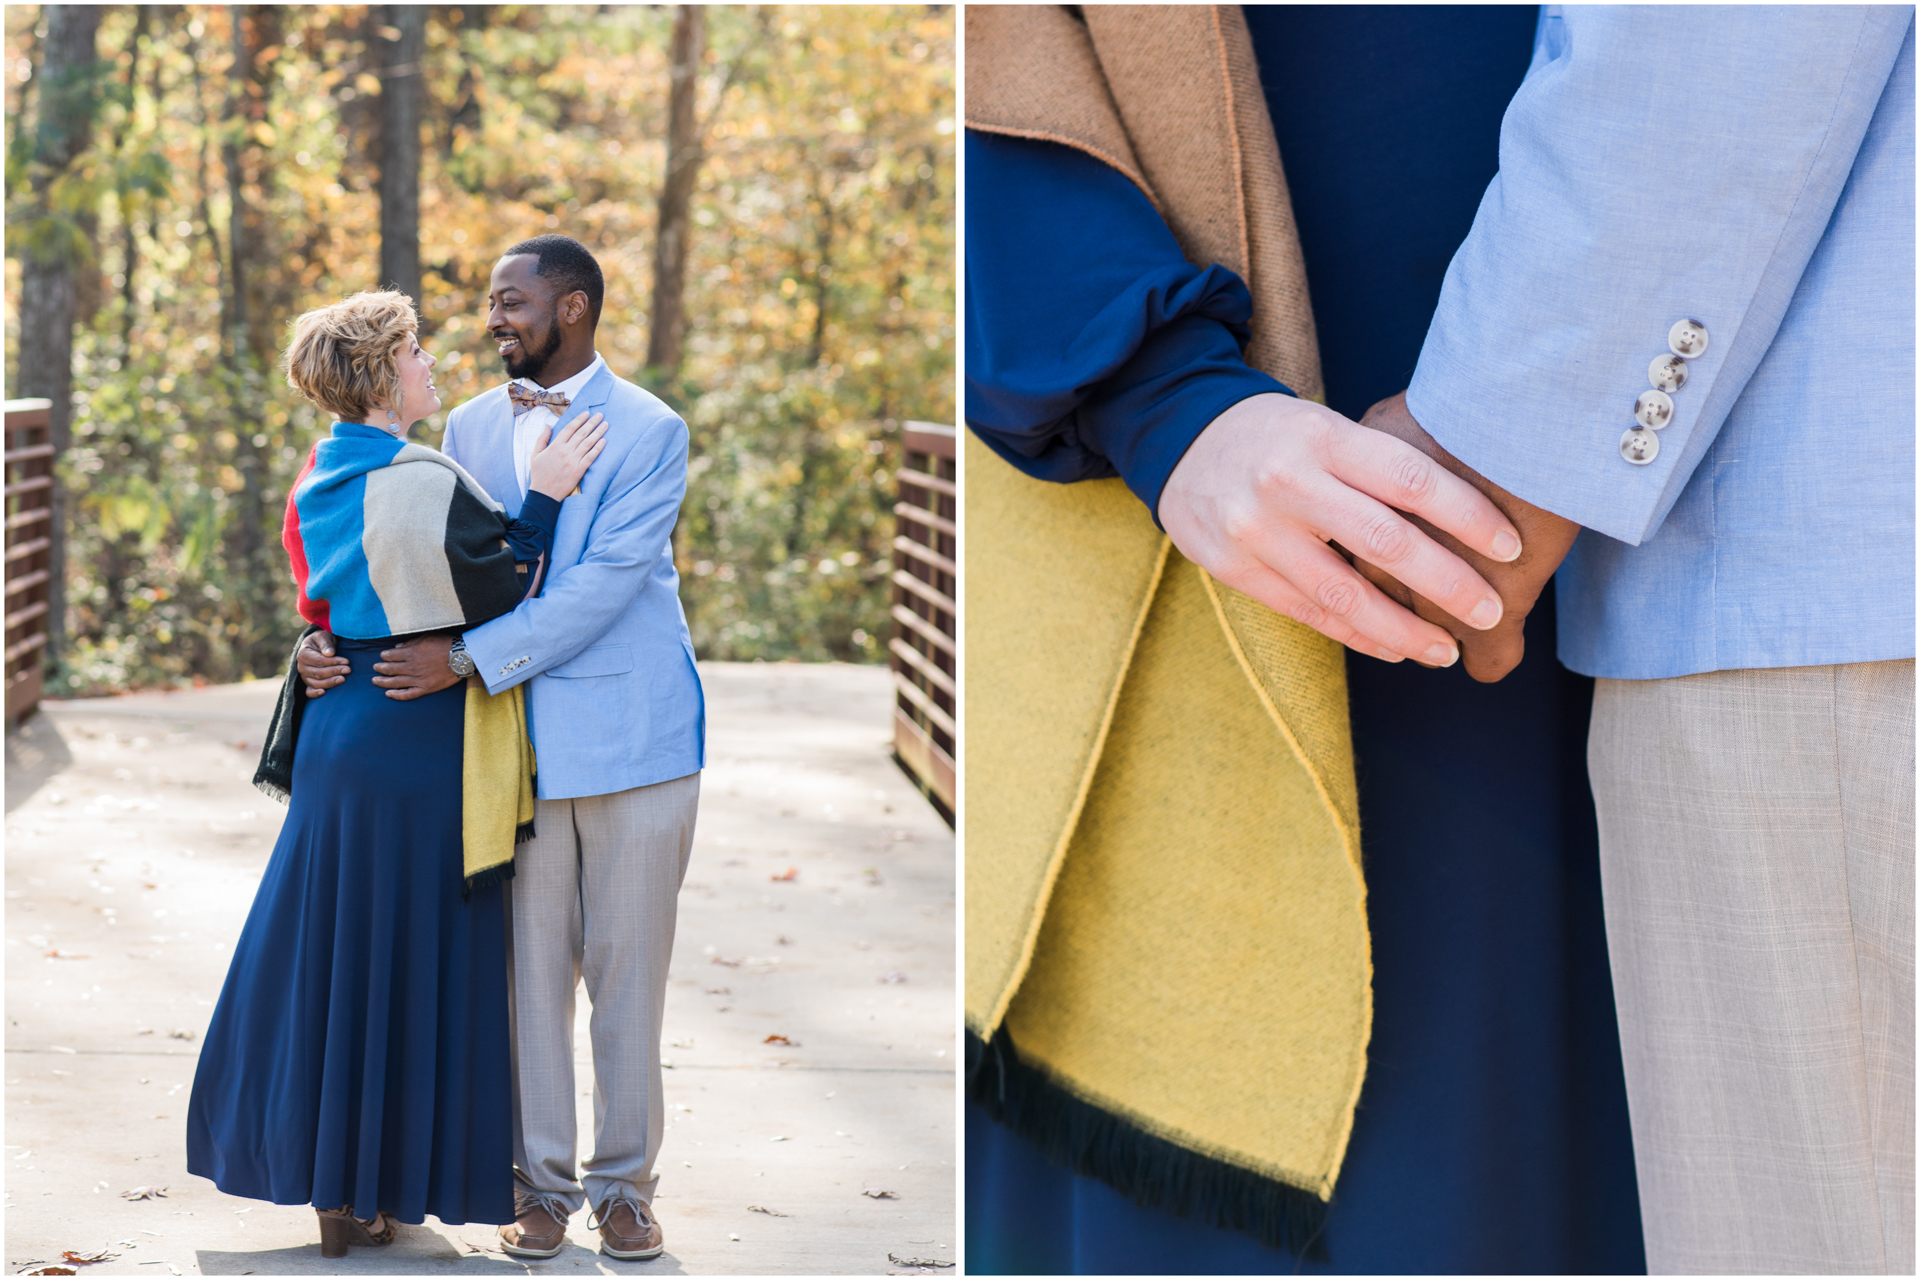 interracial Hand holding - engagement session